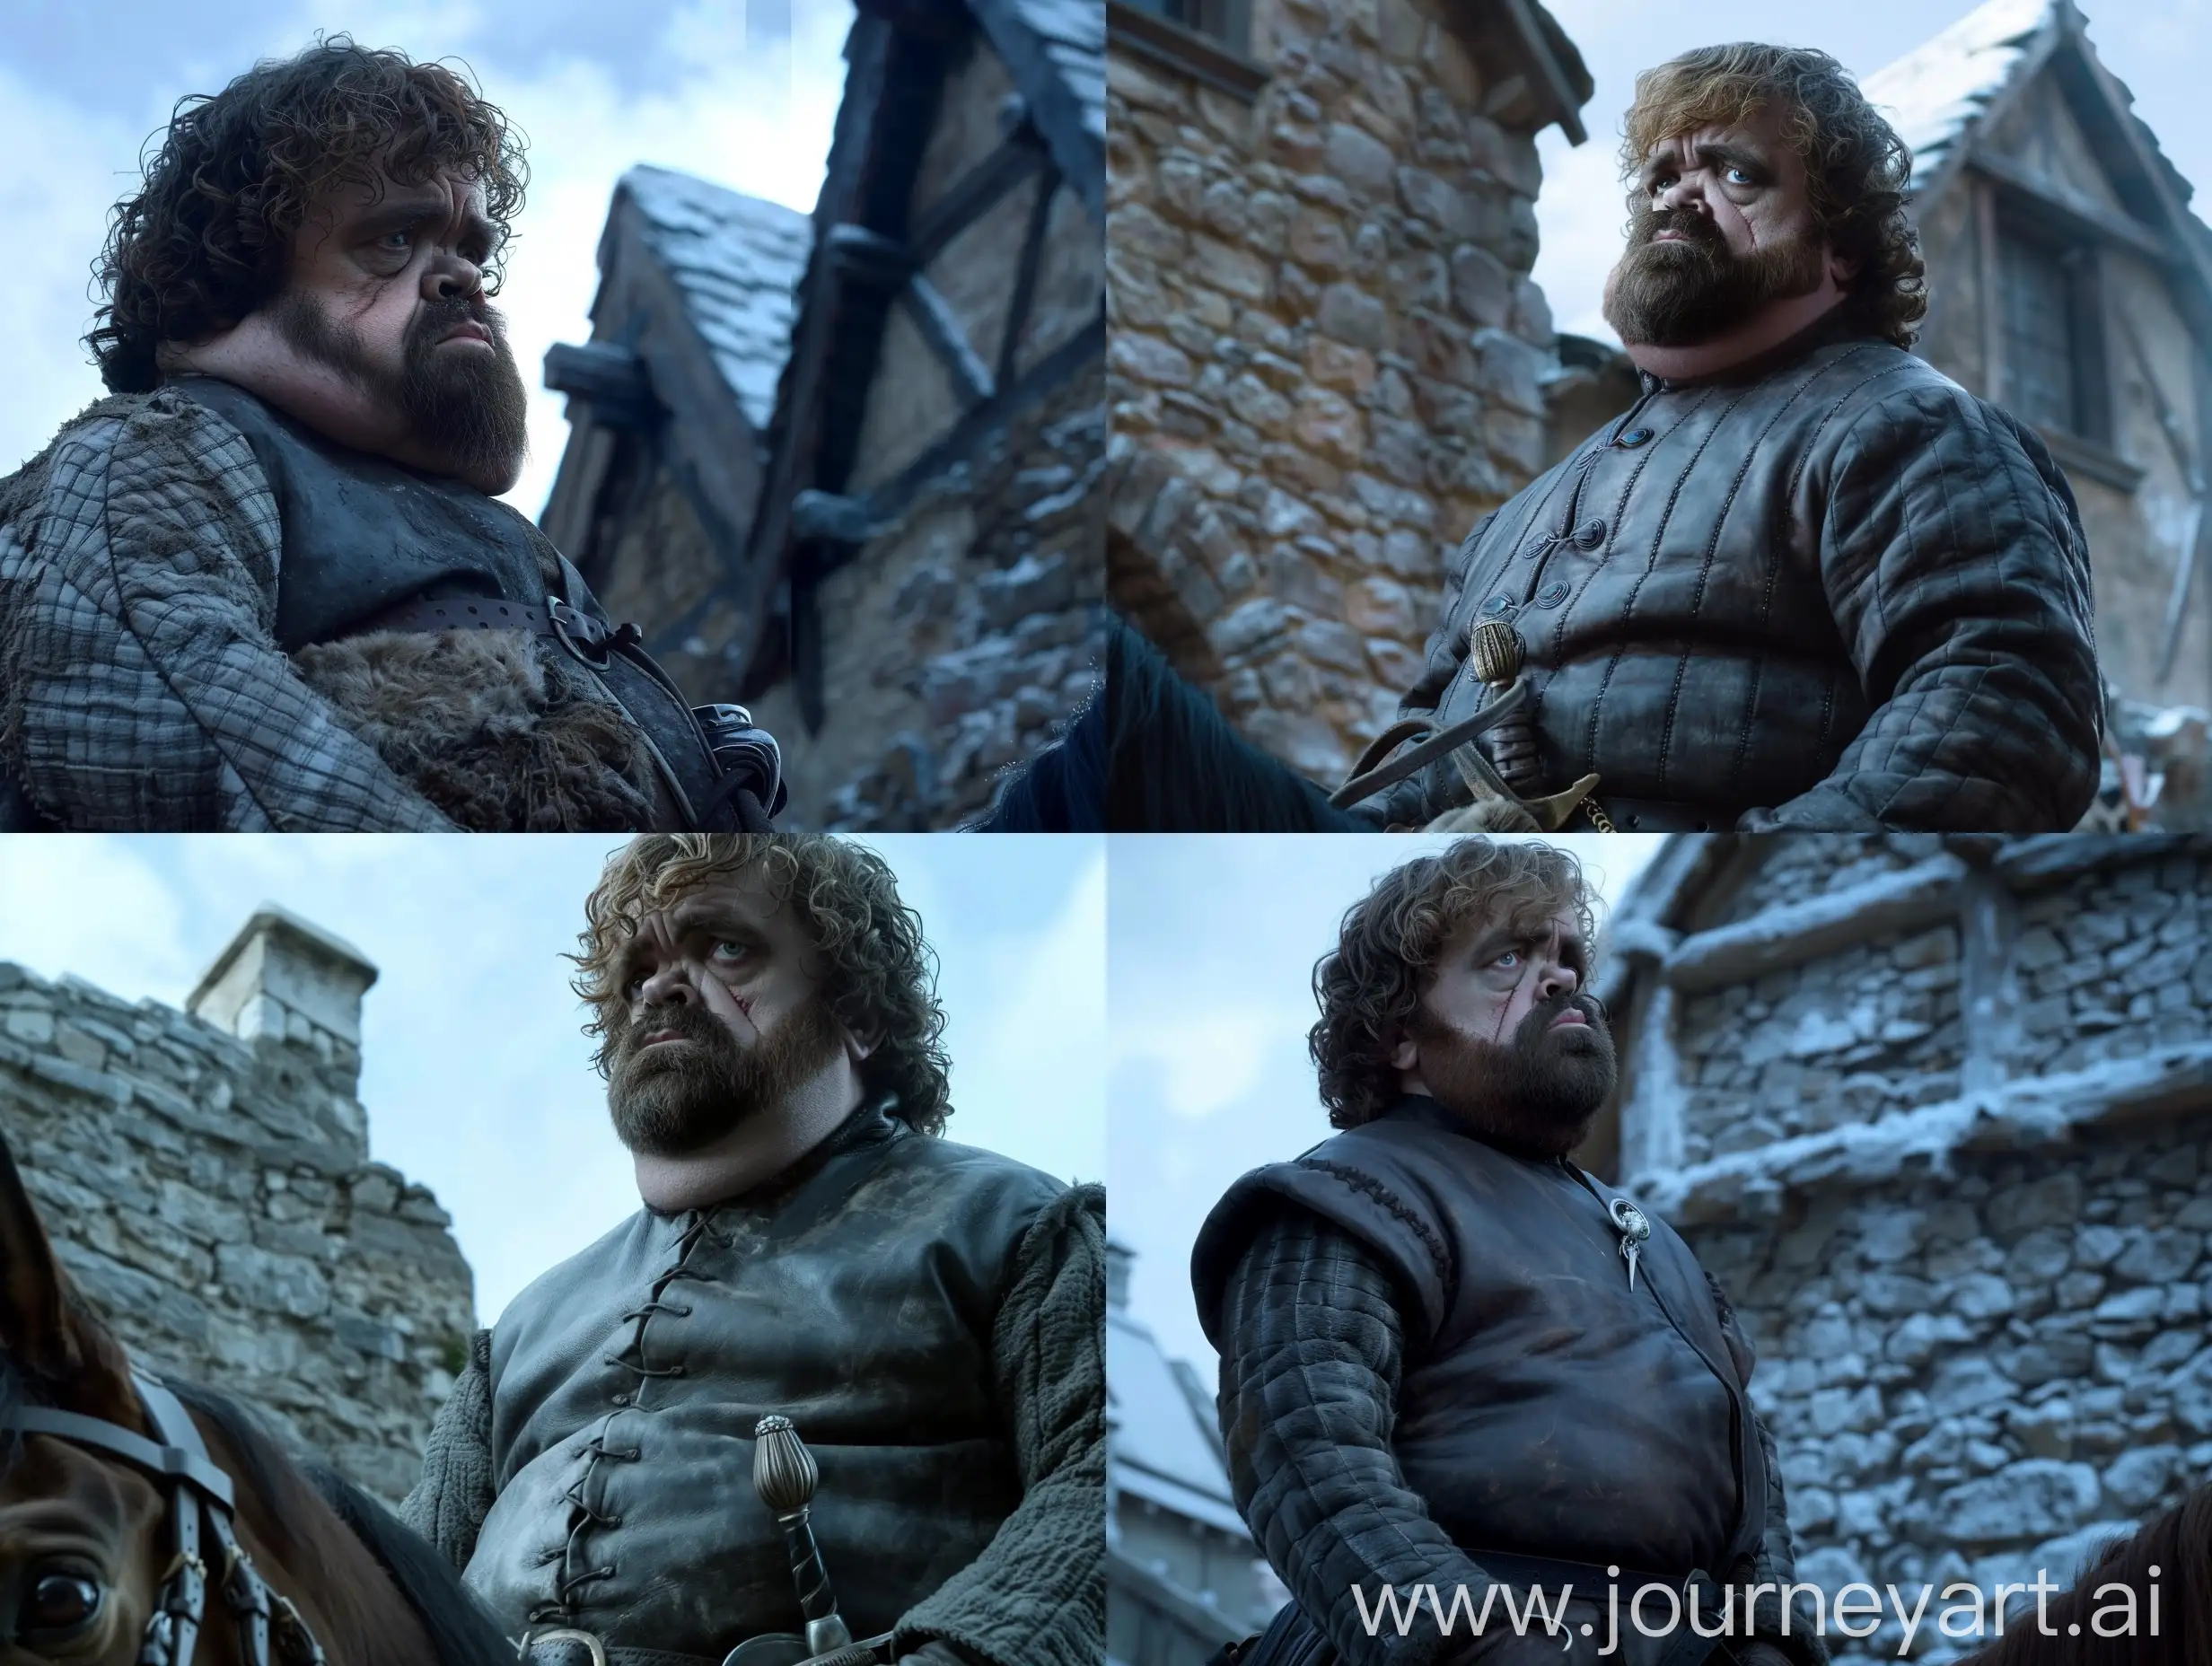 Enigmatic-Tyrion-Lannister-Riding-Horse-in-Winterfell